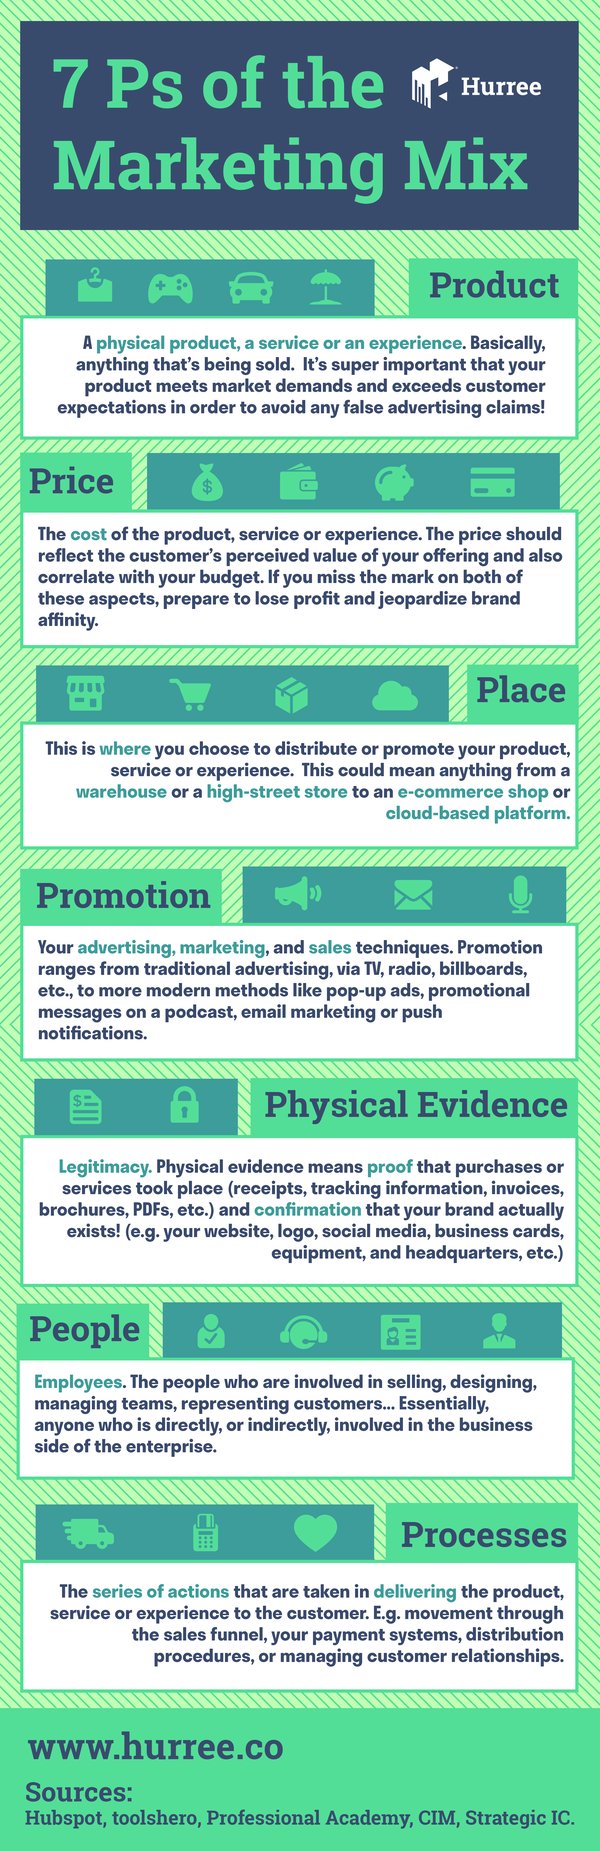 The 7ps of the marketing mix infographic marketing mix hurree the marketing mix marketing strategy market segmentation